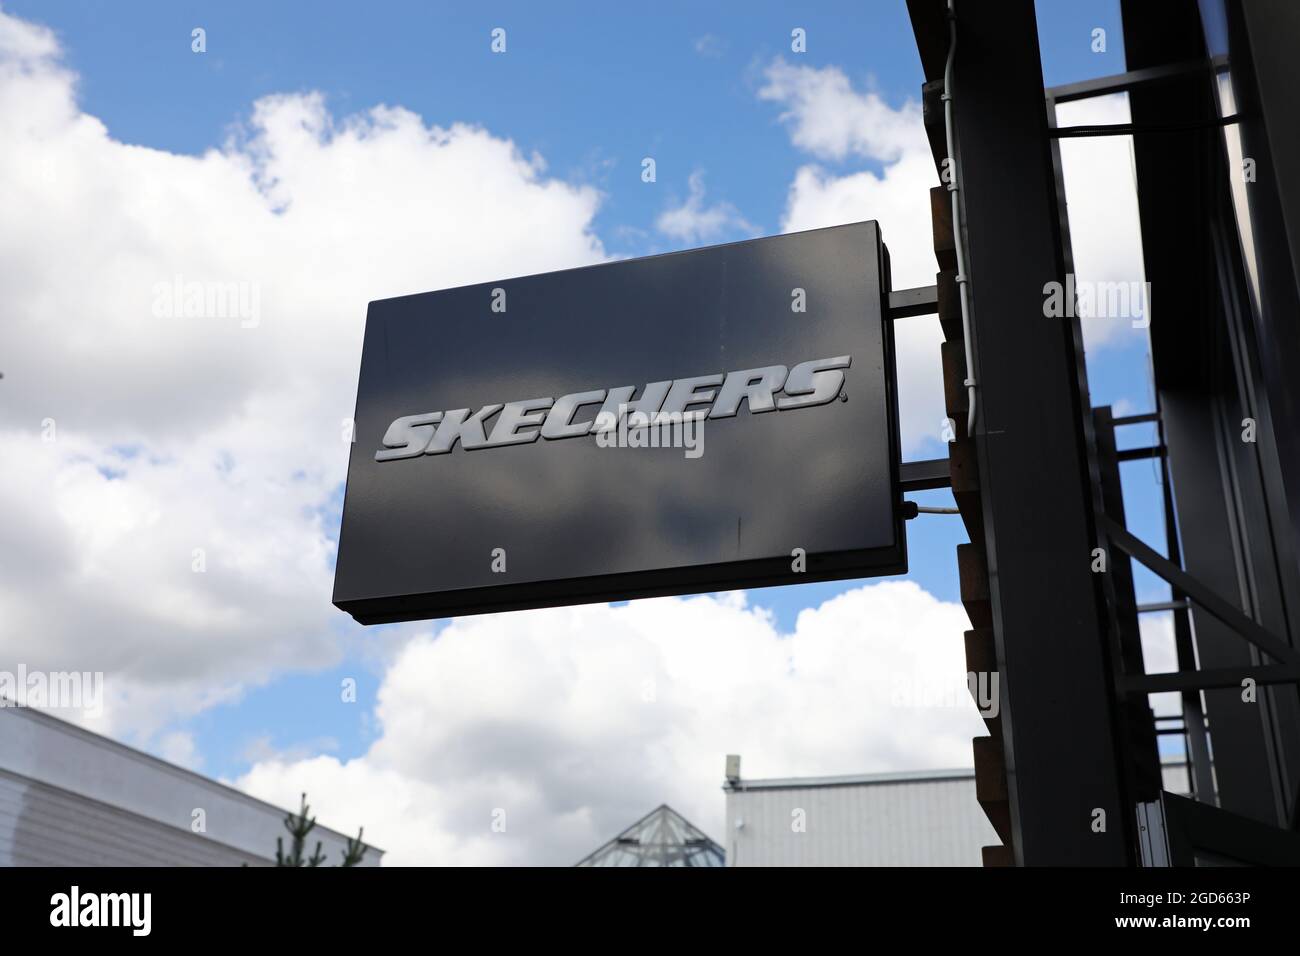 Skechers signs at Hede Fashion Outlet Stock Photo - Alamy